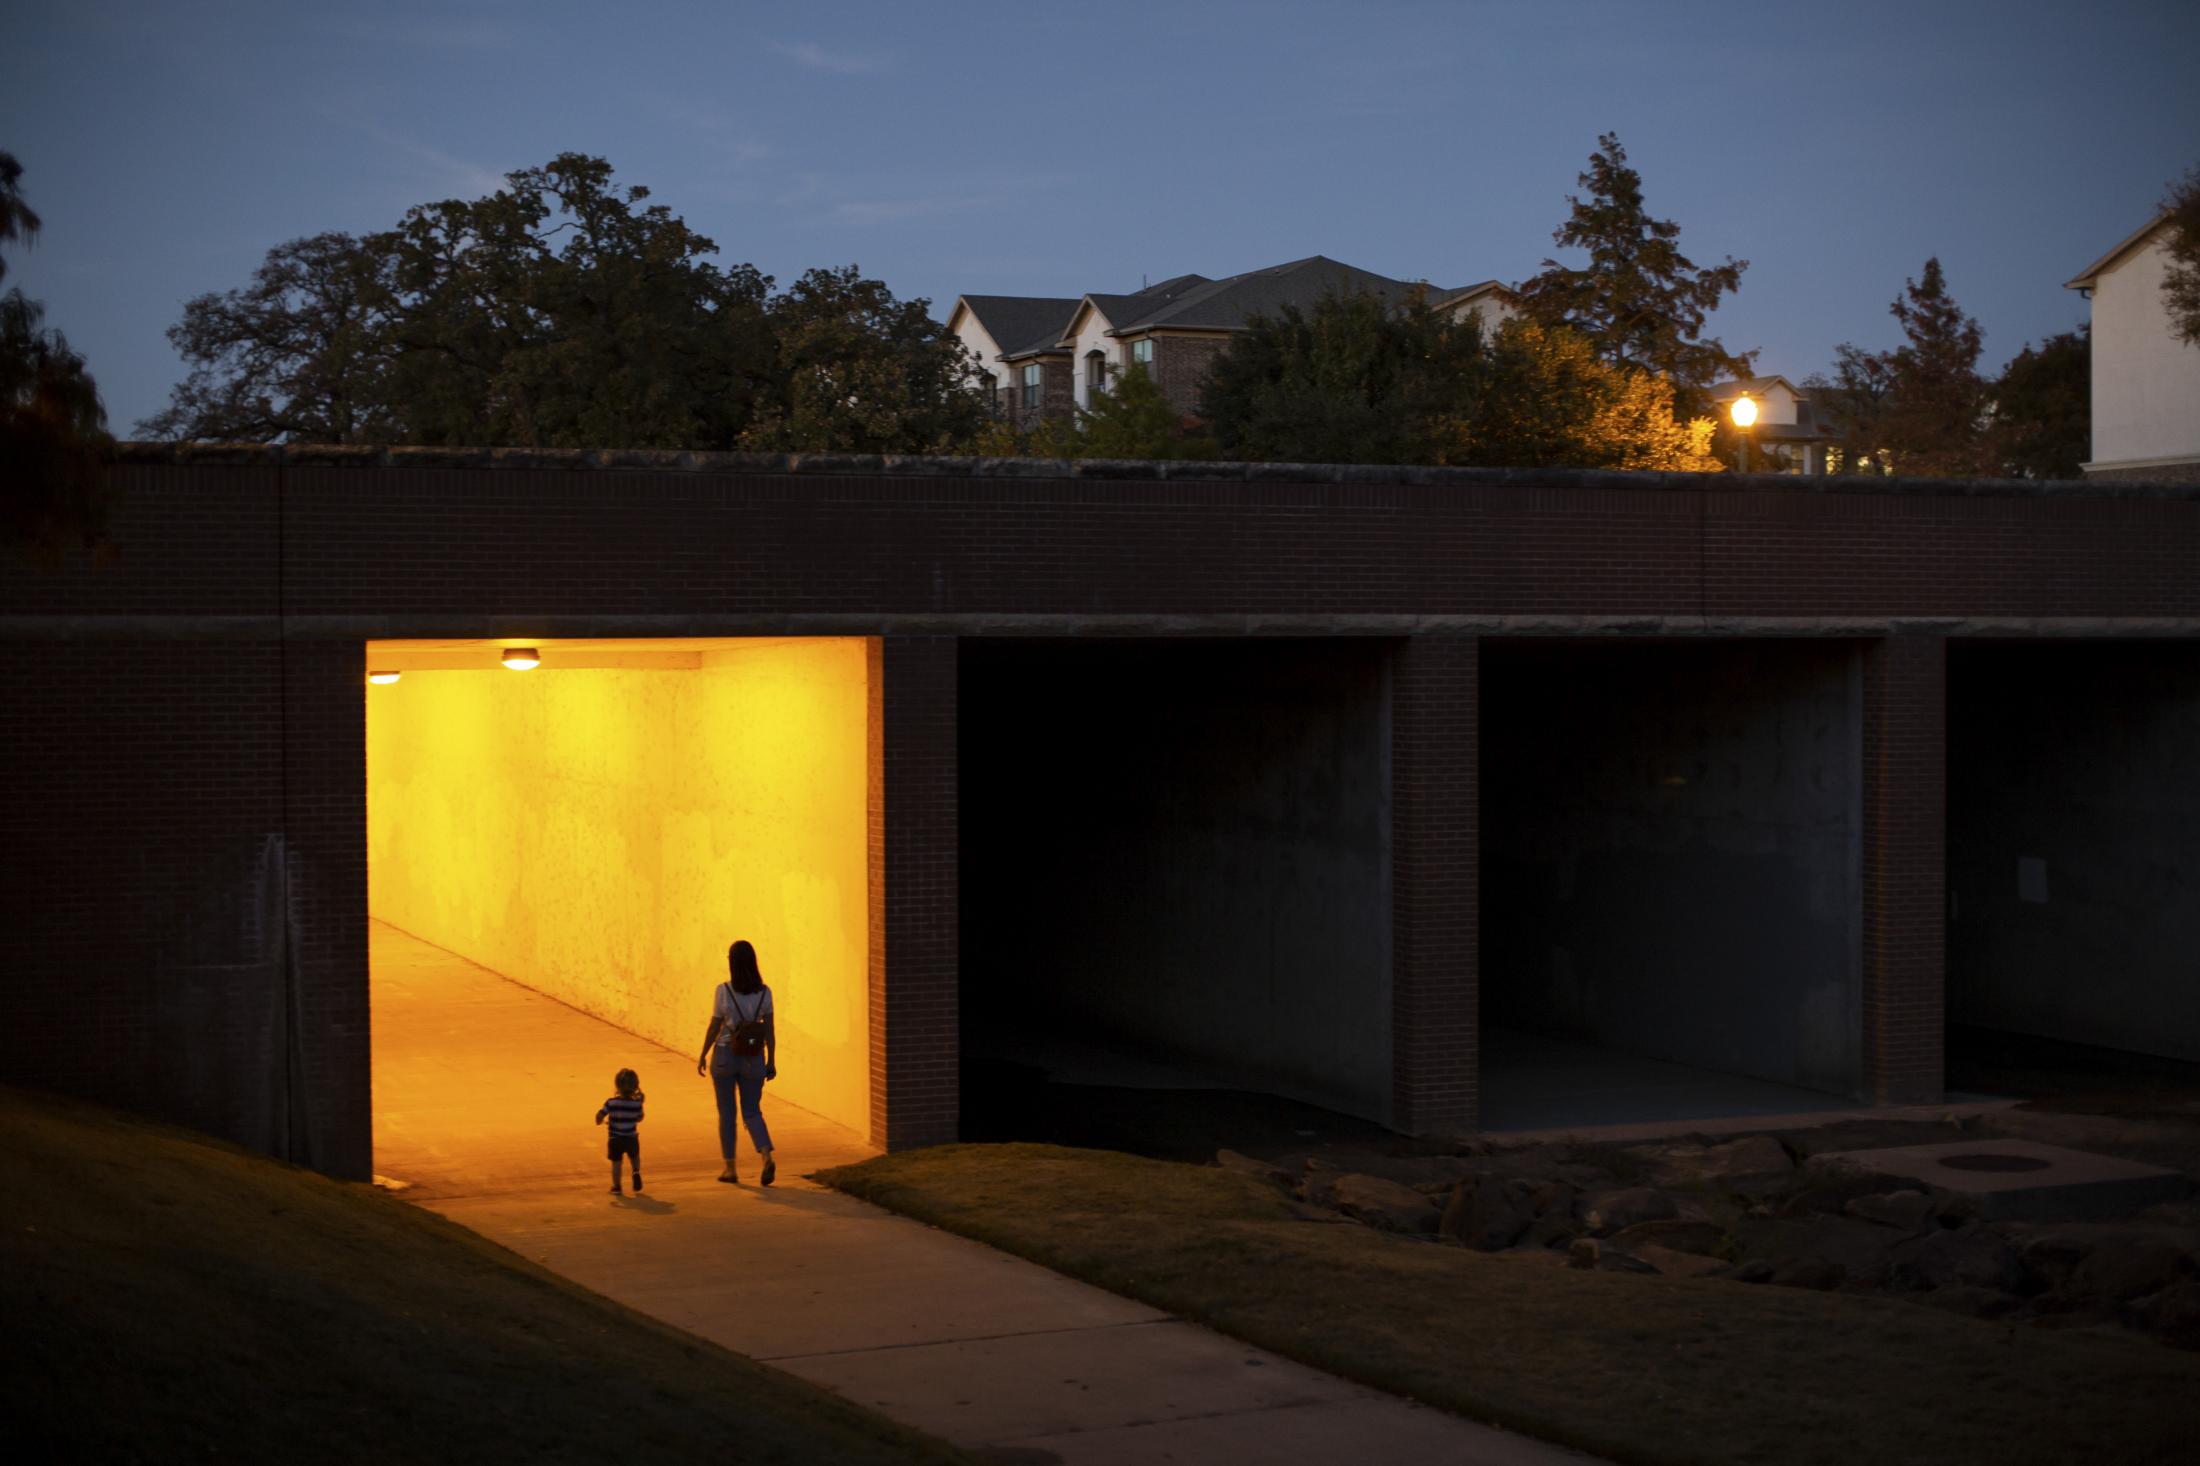 A mother and child take an evening walk during the 2020 COVID-19 Pandemic. Keller, Texas, many...